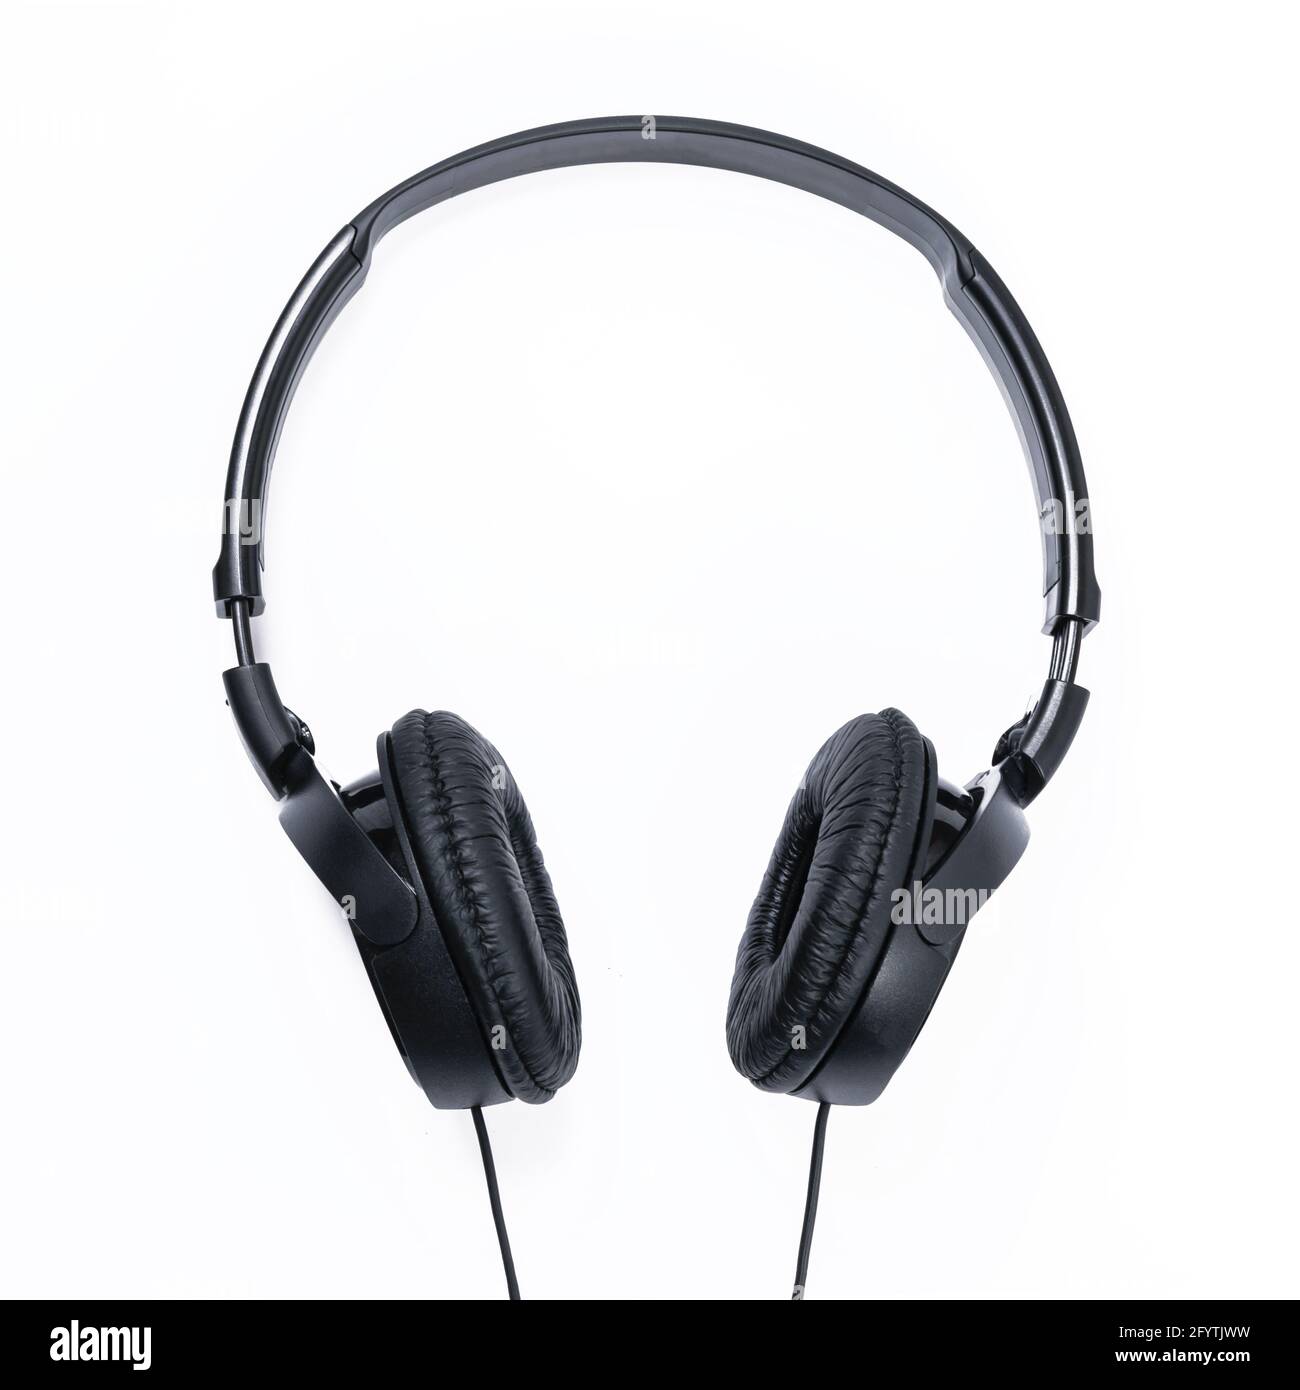 Modern black wired headphones isolated on a white background in close-up Stock Photo